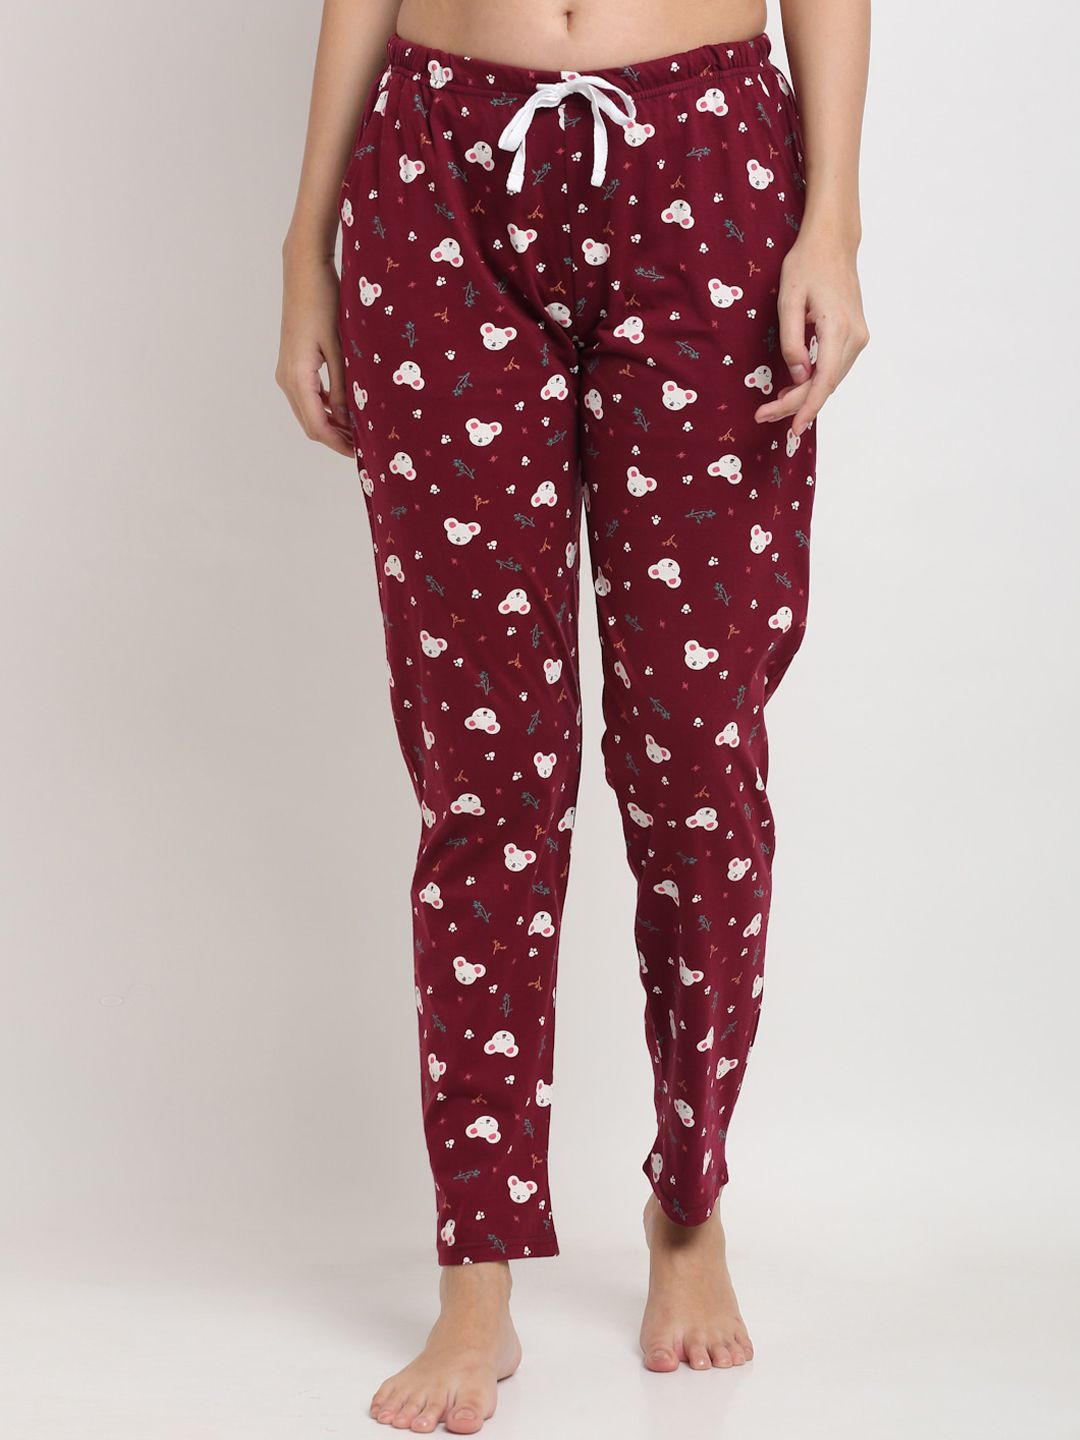 Kanvin Women Maroon Printed Cotton Lounge Pants Price in India